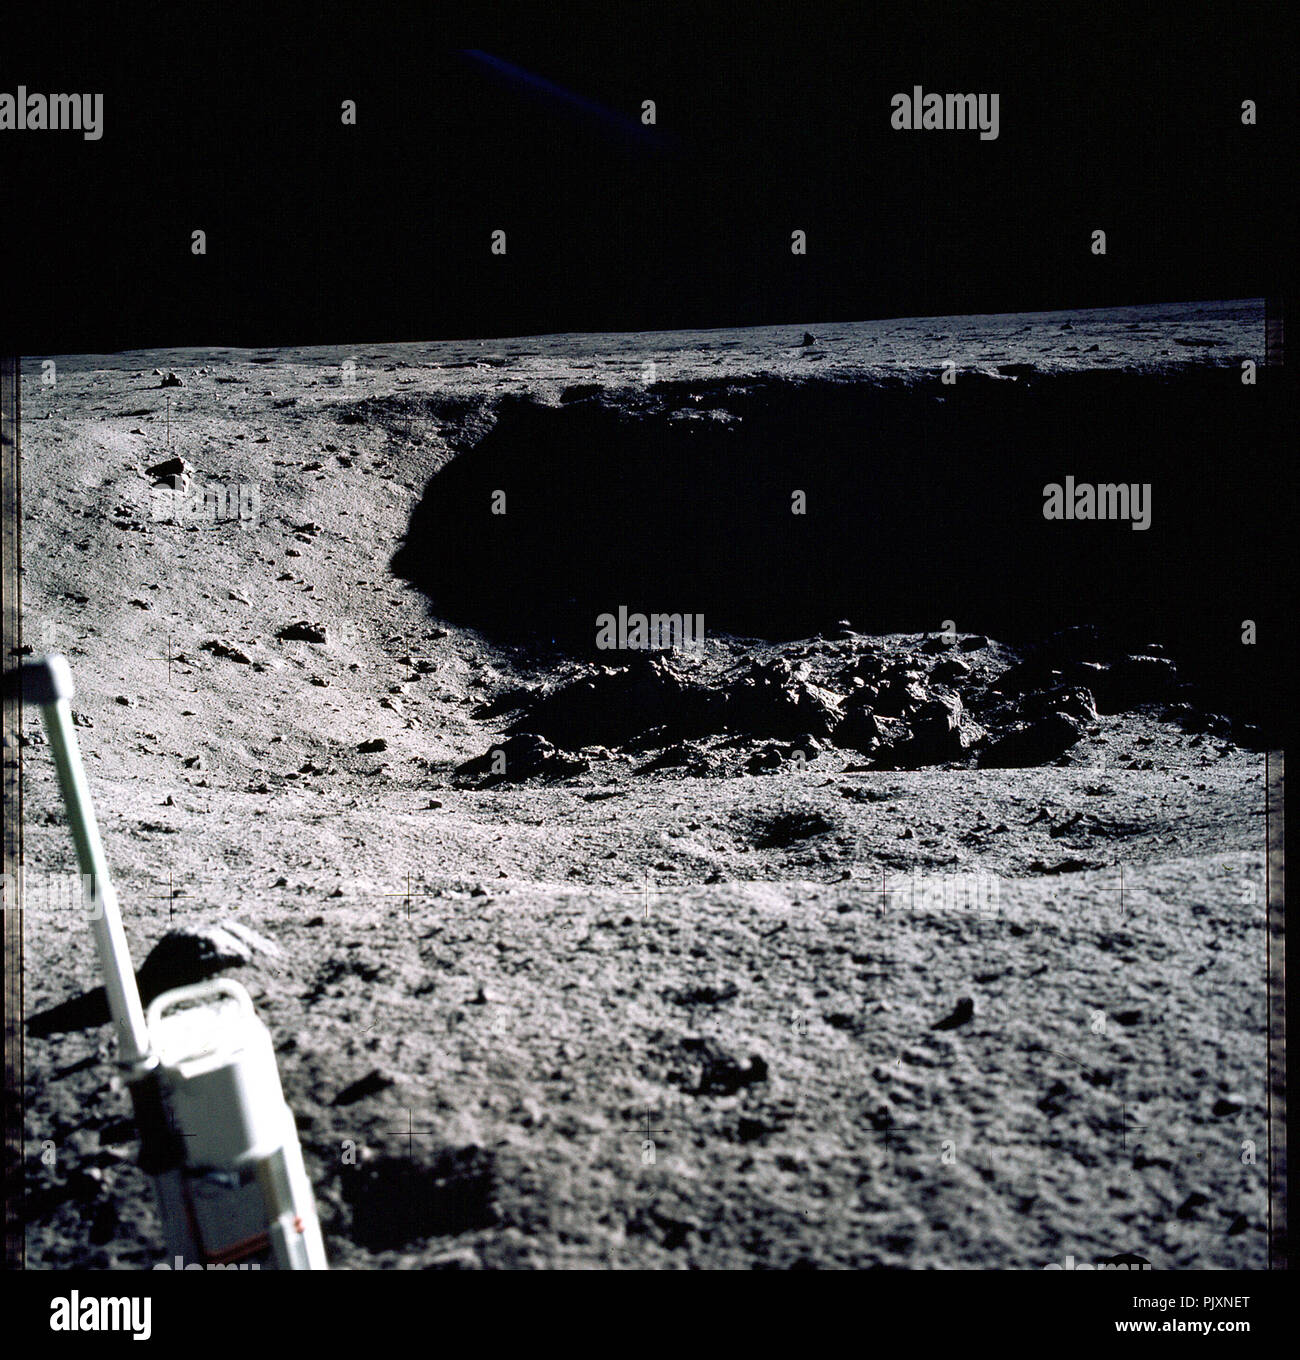 The Moon - (FILE) -- This is a photograph taken by Apollo 11 astronaut Neil Armstrong looking into East Crater, about 60 meters away from the lunar module. He estimated the crater was about 20 to 25 meters in diameter and 4 1/2 to 6 meters deep. The crater wall in the background is in deep shadow. The object at lower left is the stereo close-up camera. The view is roughly towards the northeast.  Credit: NASA via CNP /MediaPunch Stock Photo